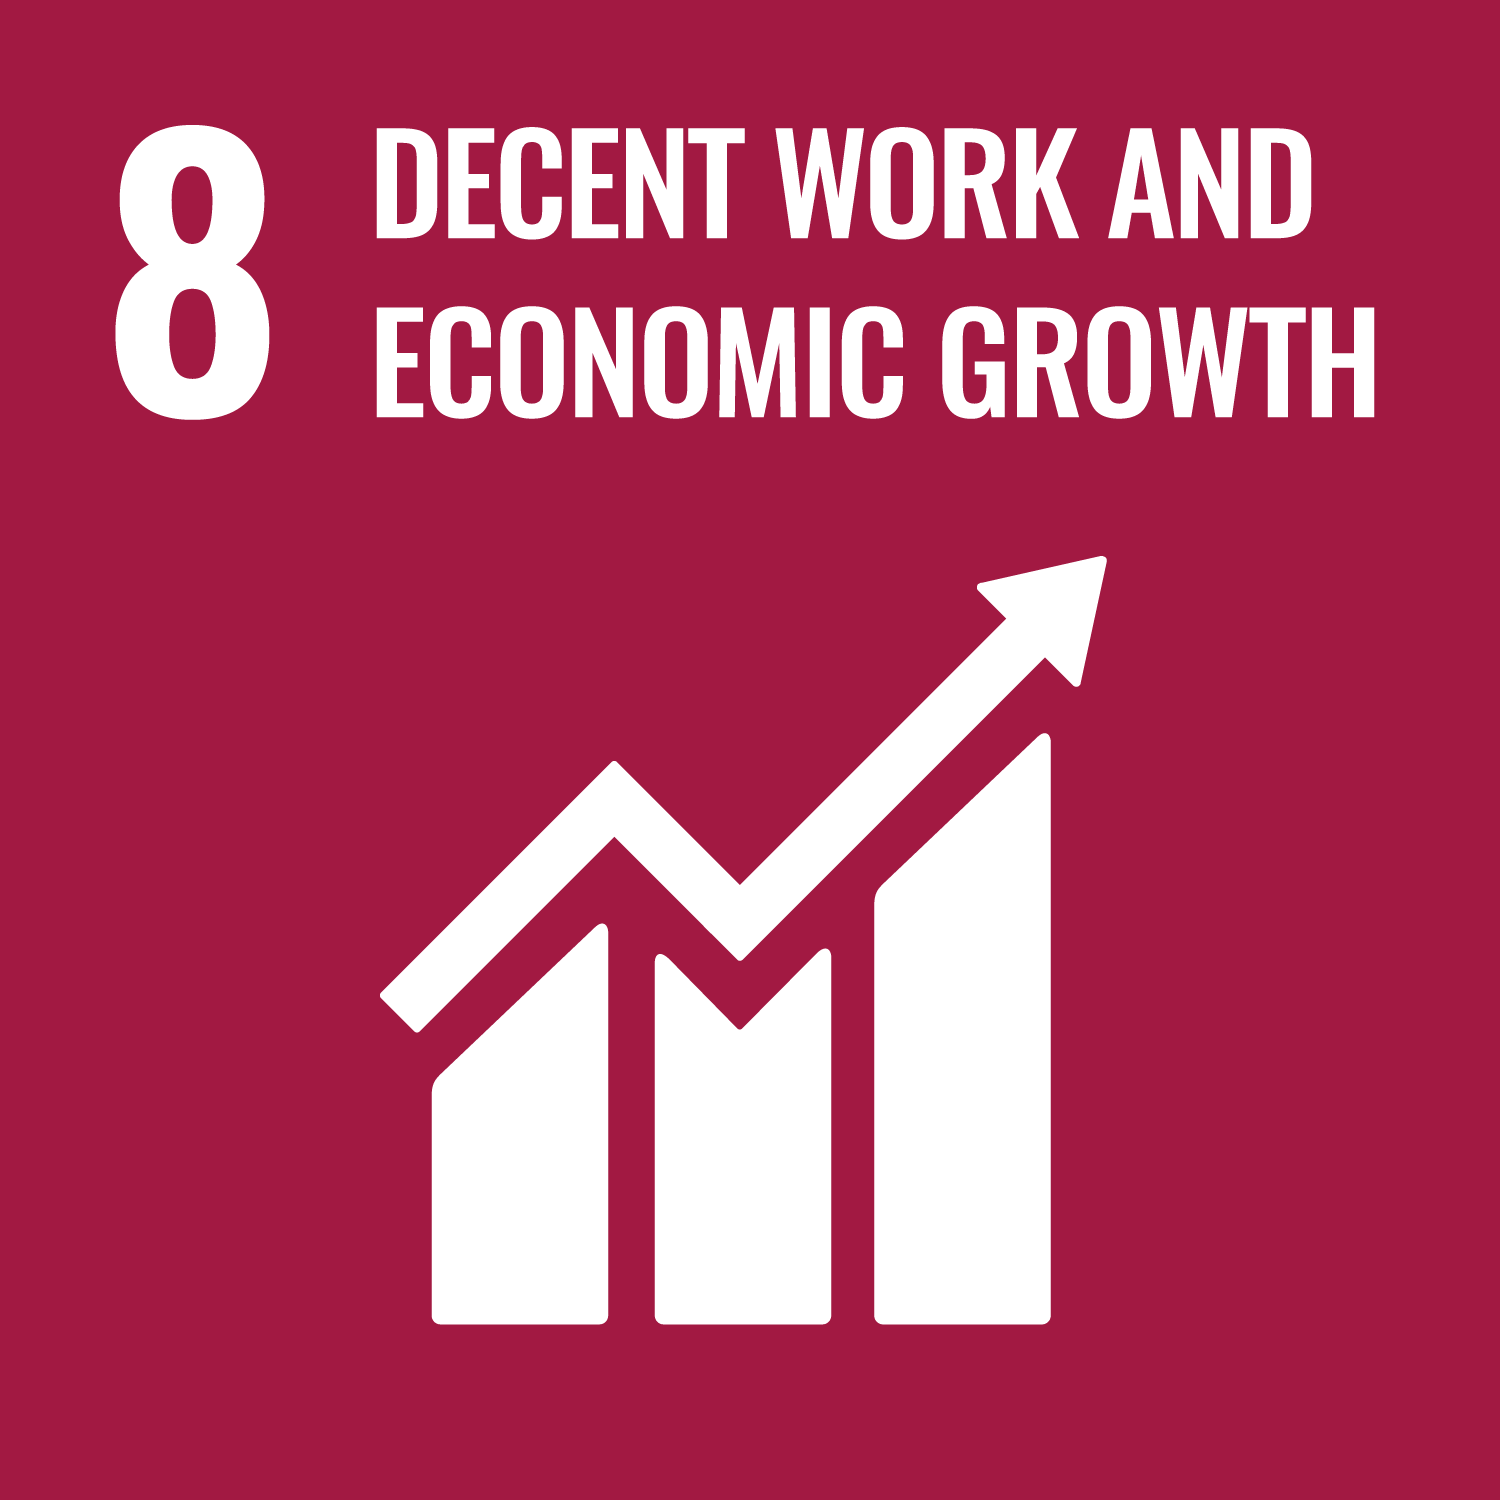 ODS 8: Decent Work and Economic Growth